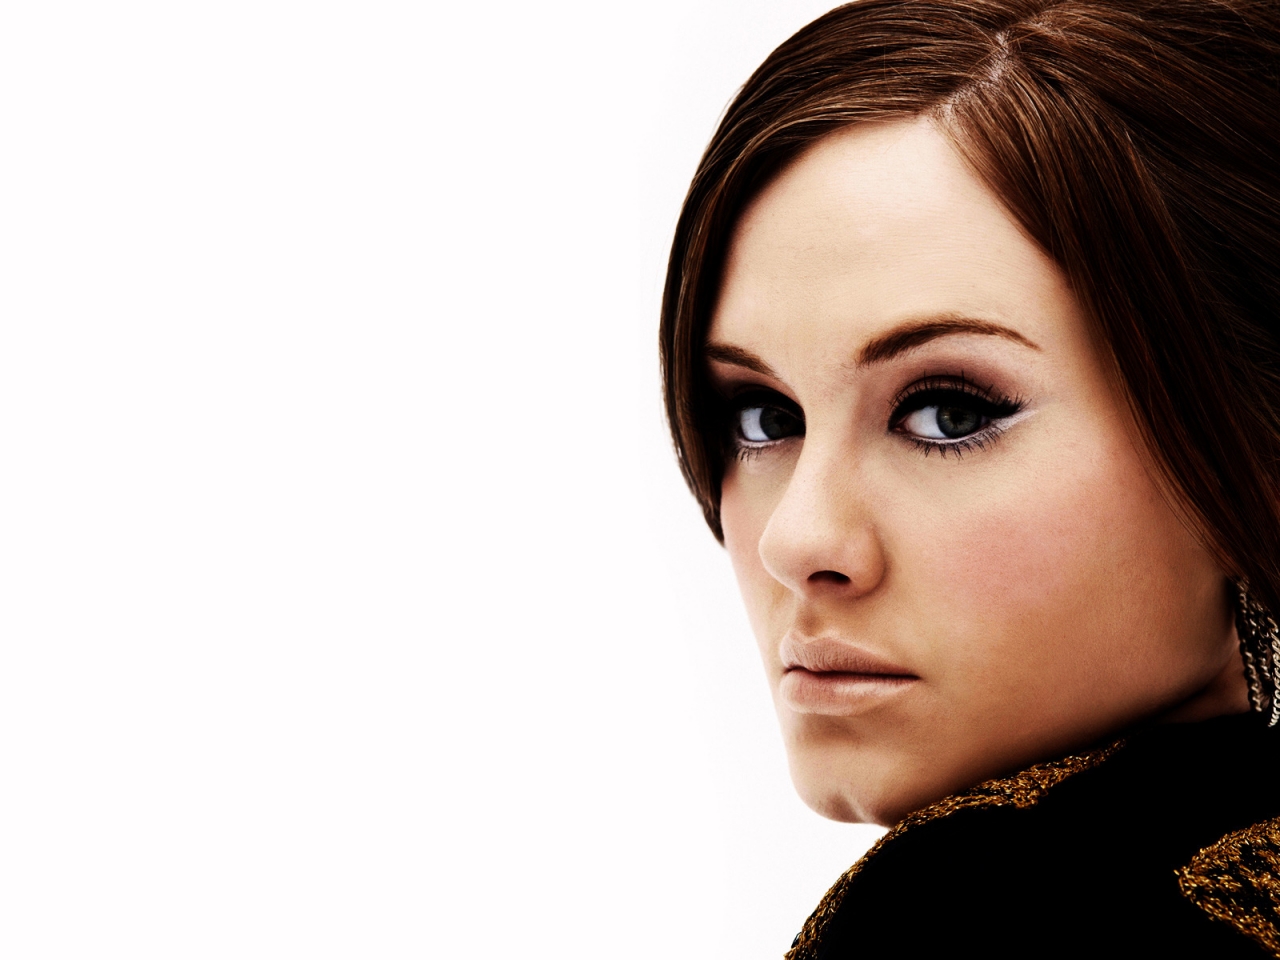 Adele Look for 1280 x 960 resolution